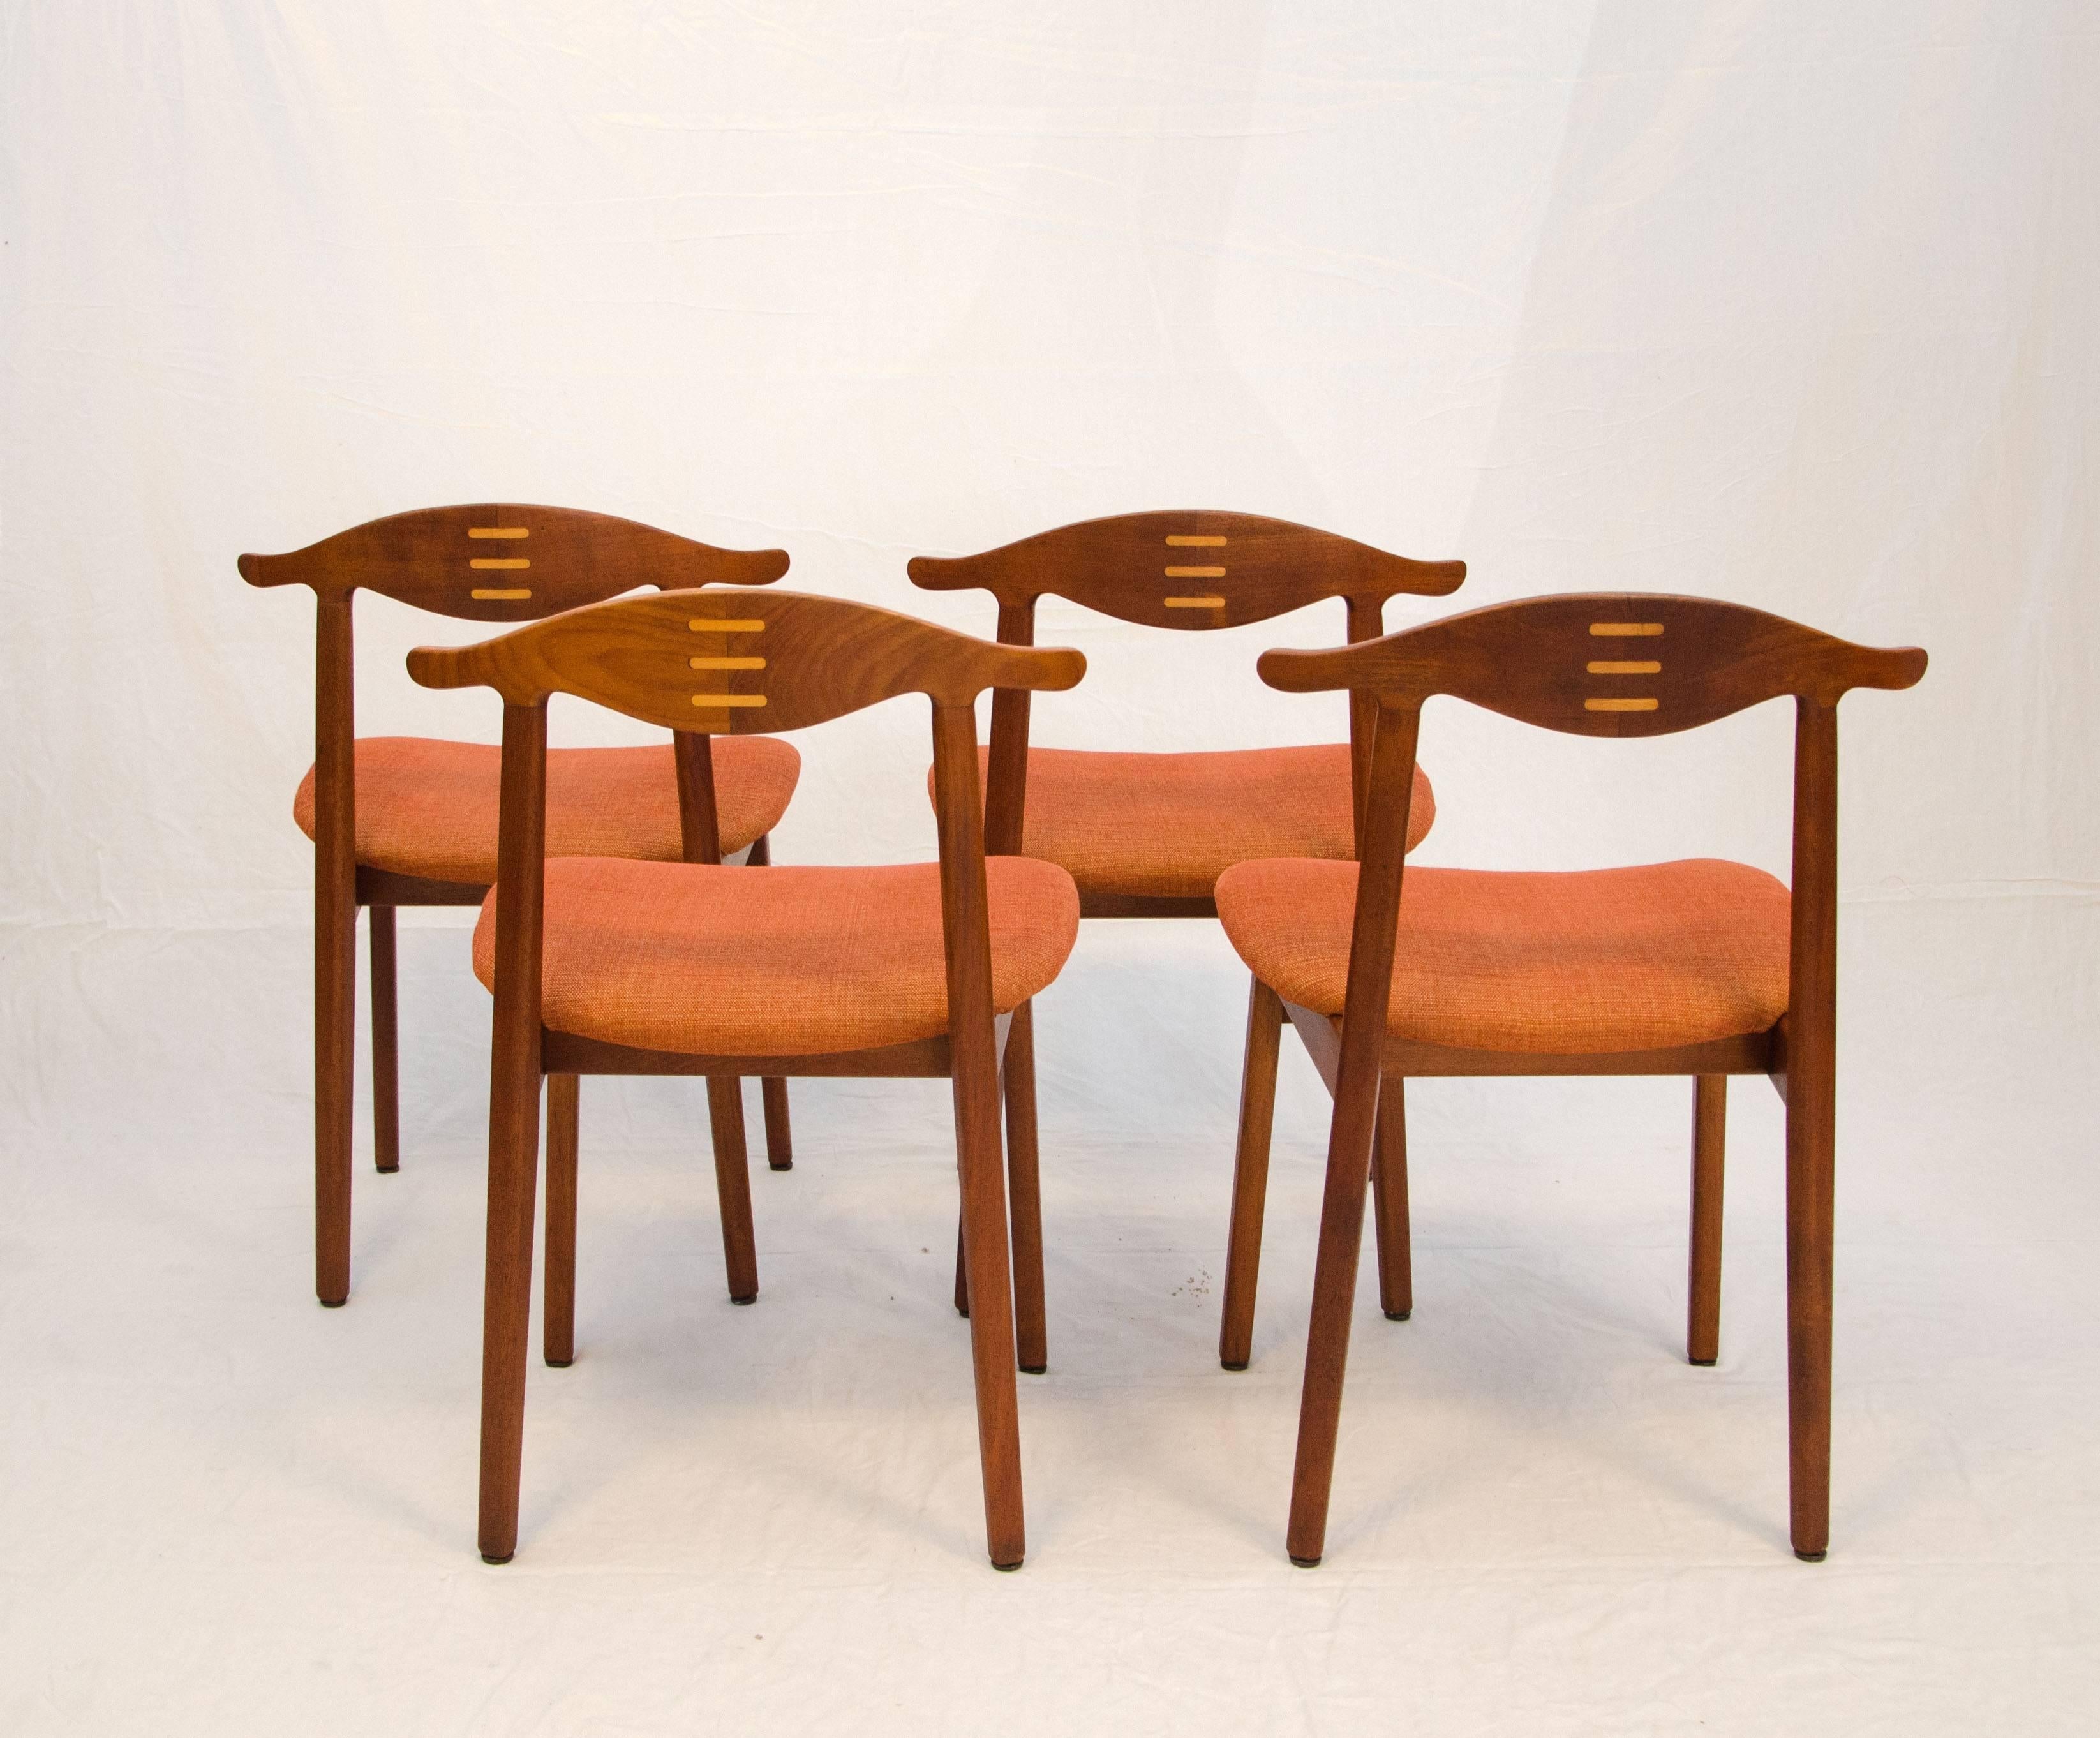 Fabric Rare Set of Four Teak Cowhorn Style Dining Chairs by Randers Stolefabrik